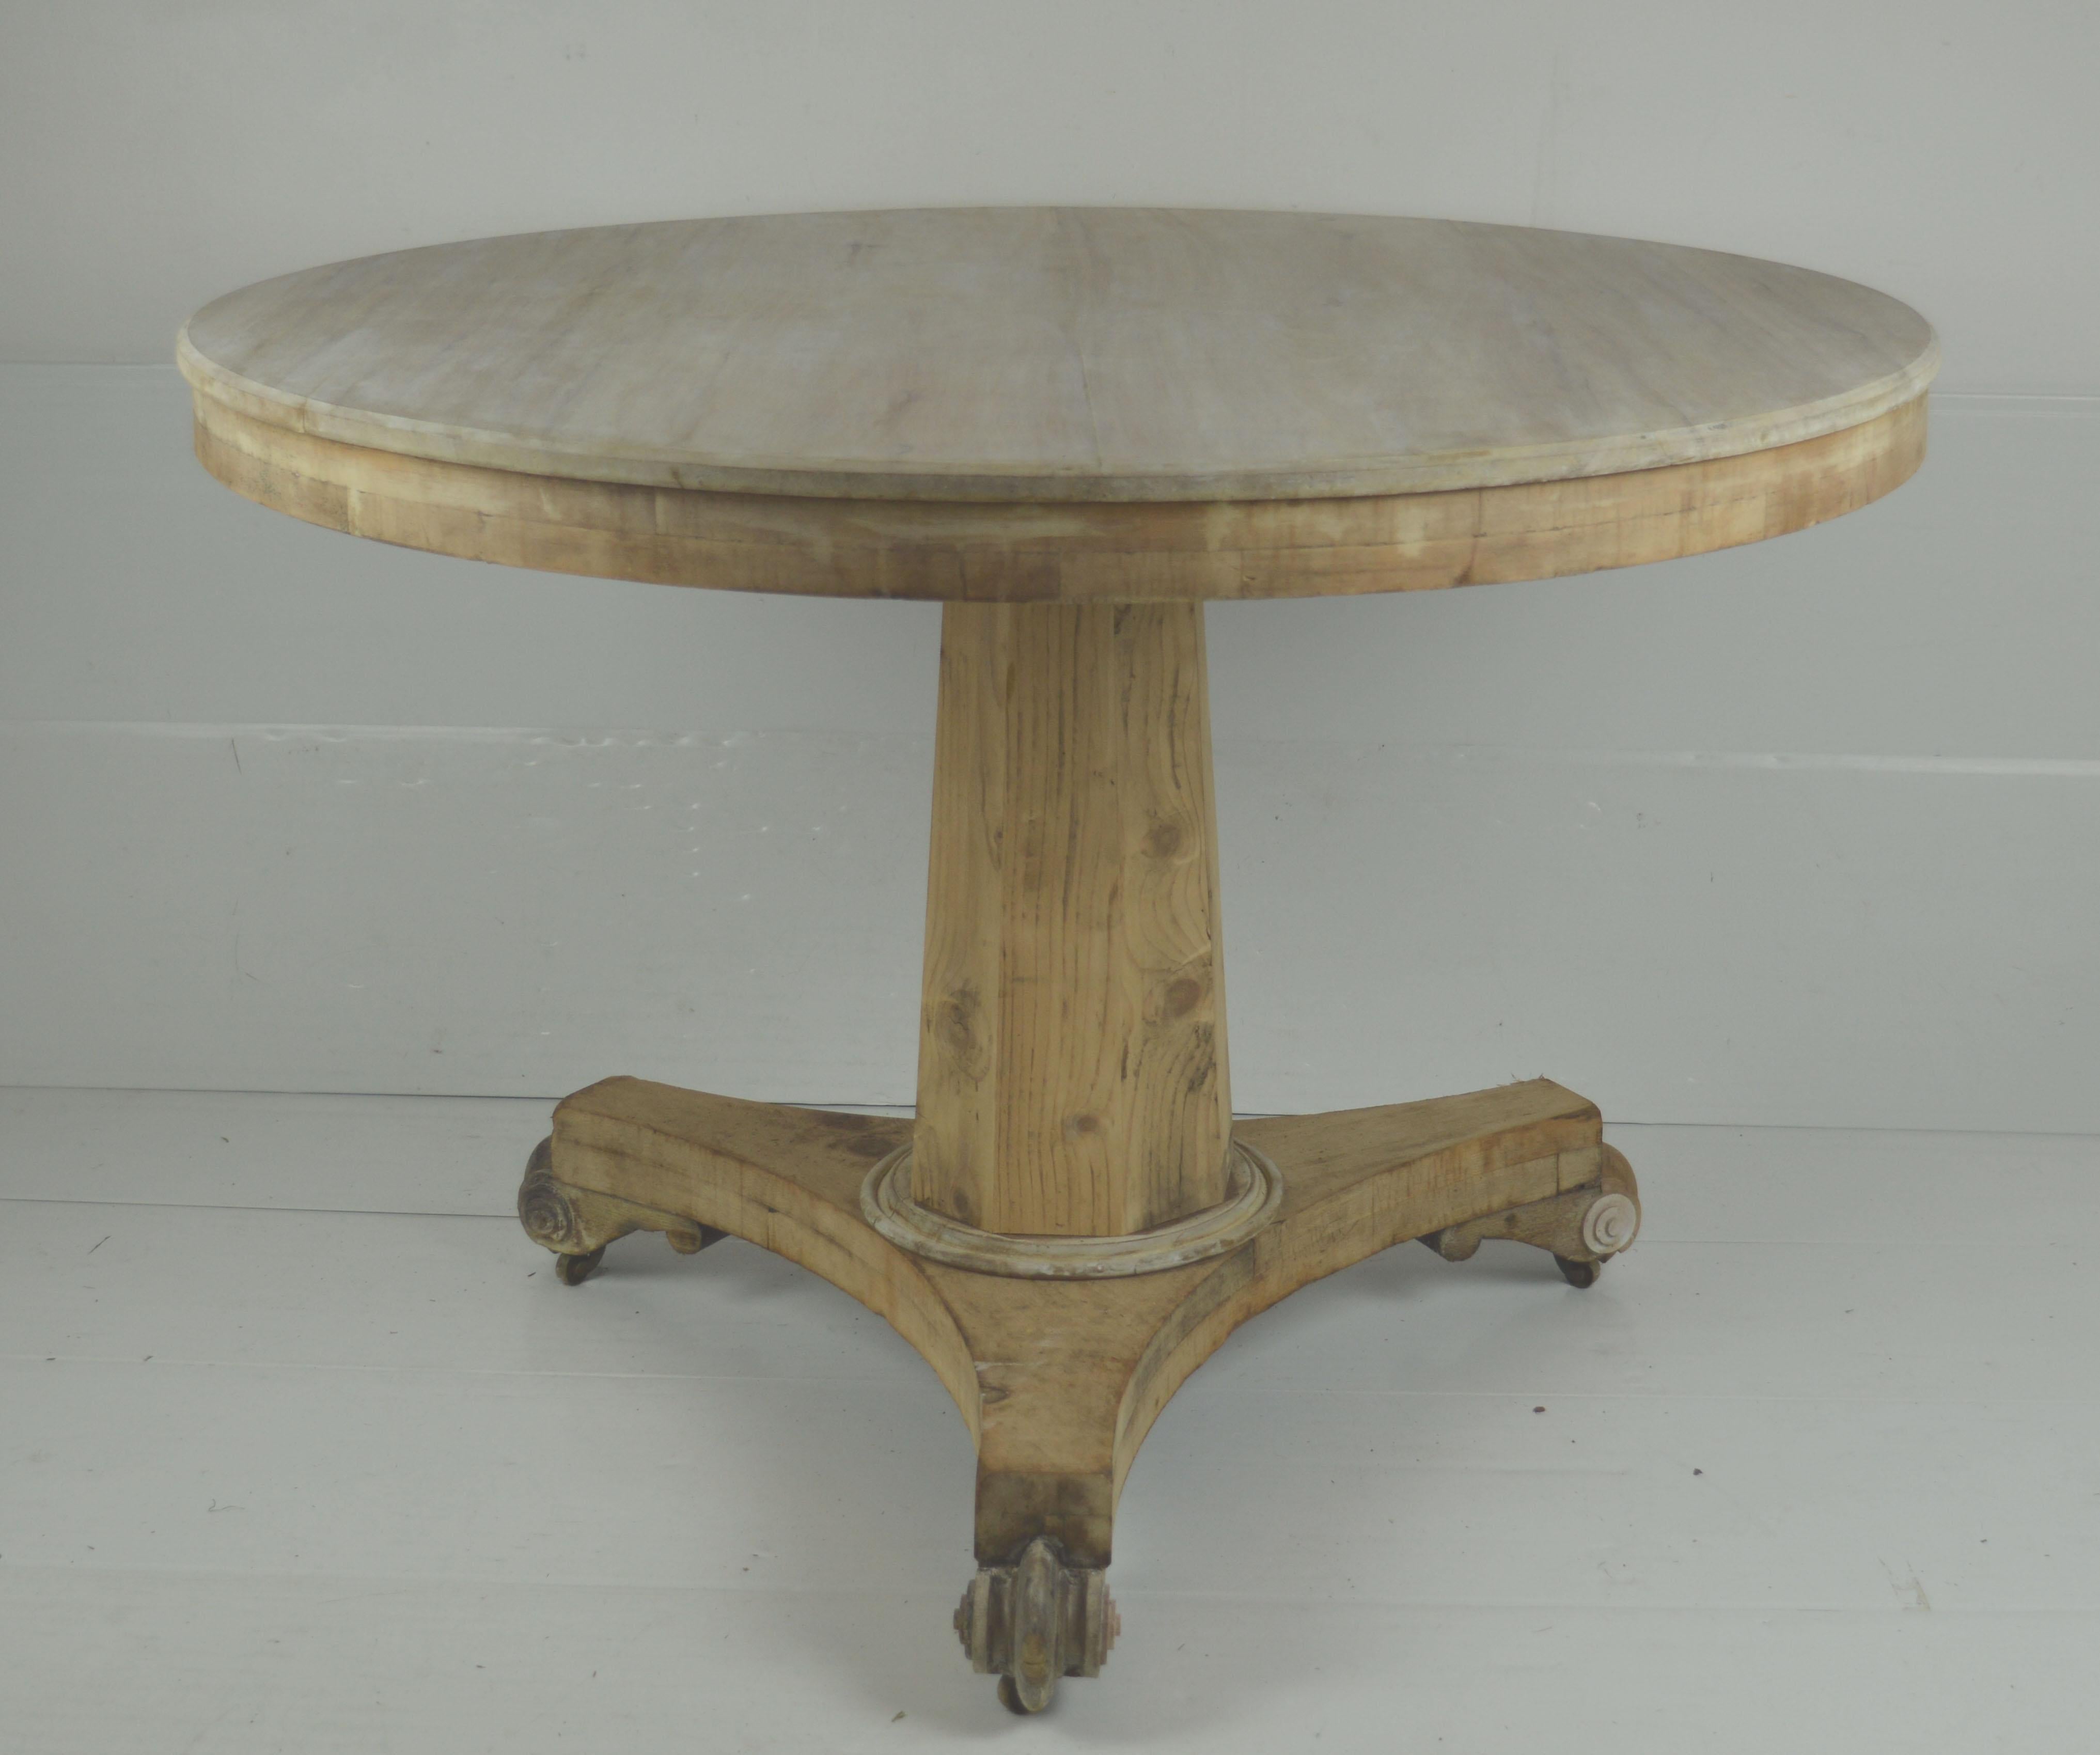 Fabulous round table. Made from bleached Honduras mahogany and pine

I particularly like the simplicity of this table .

Beautifully figured top. 

On the original castors. 

I have chosen not to lacquer or wax the table.

Free